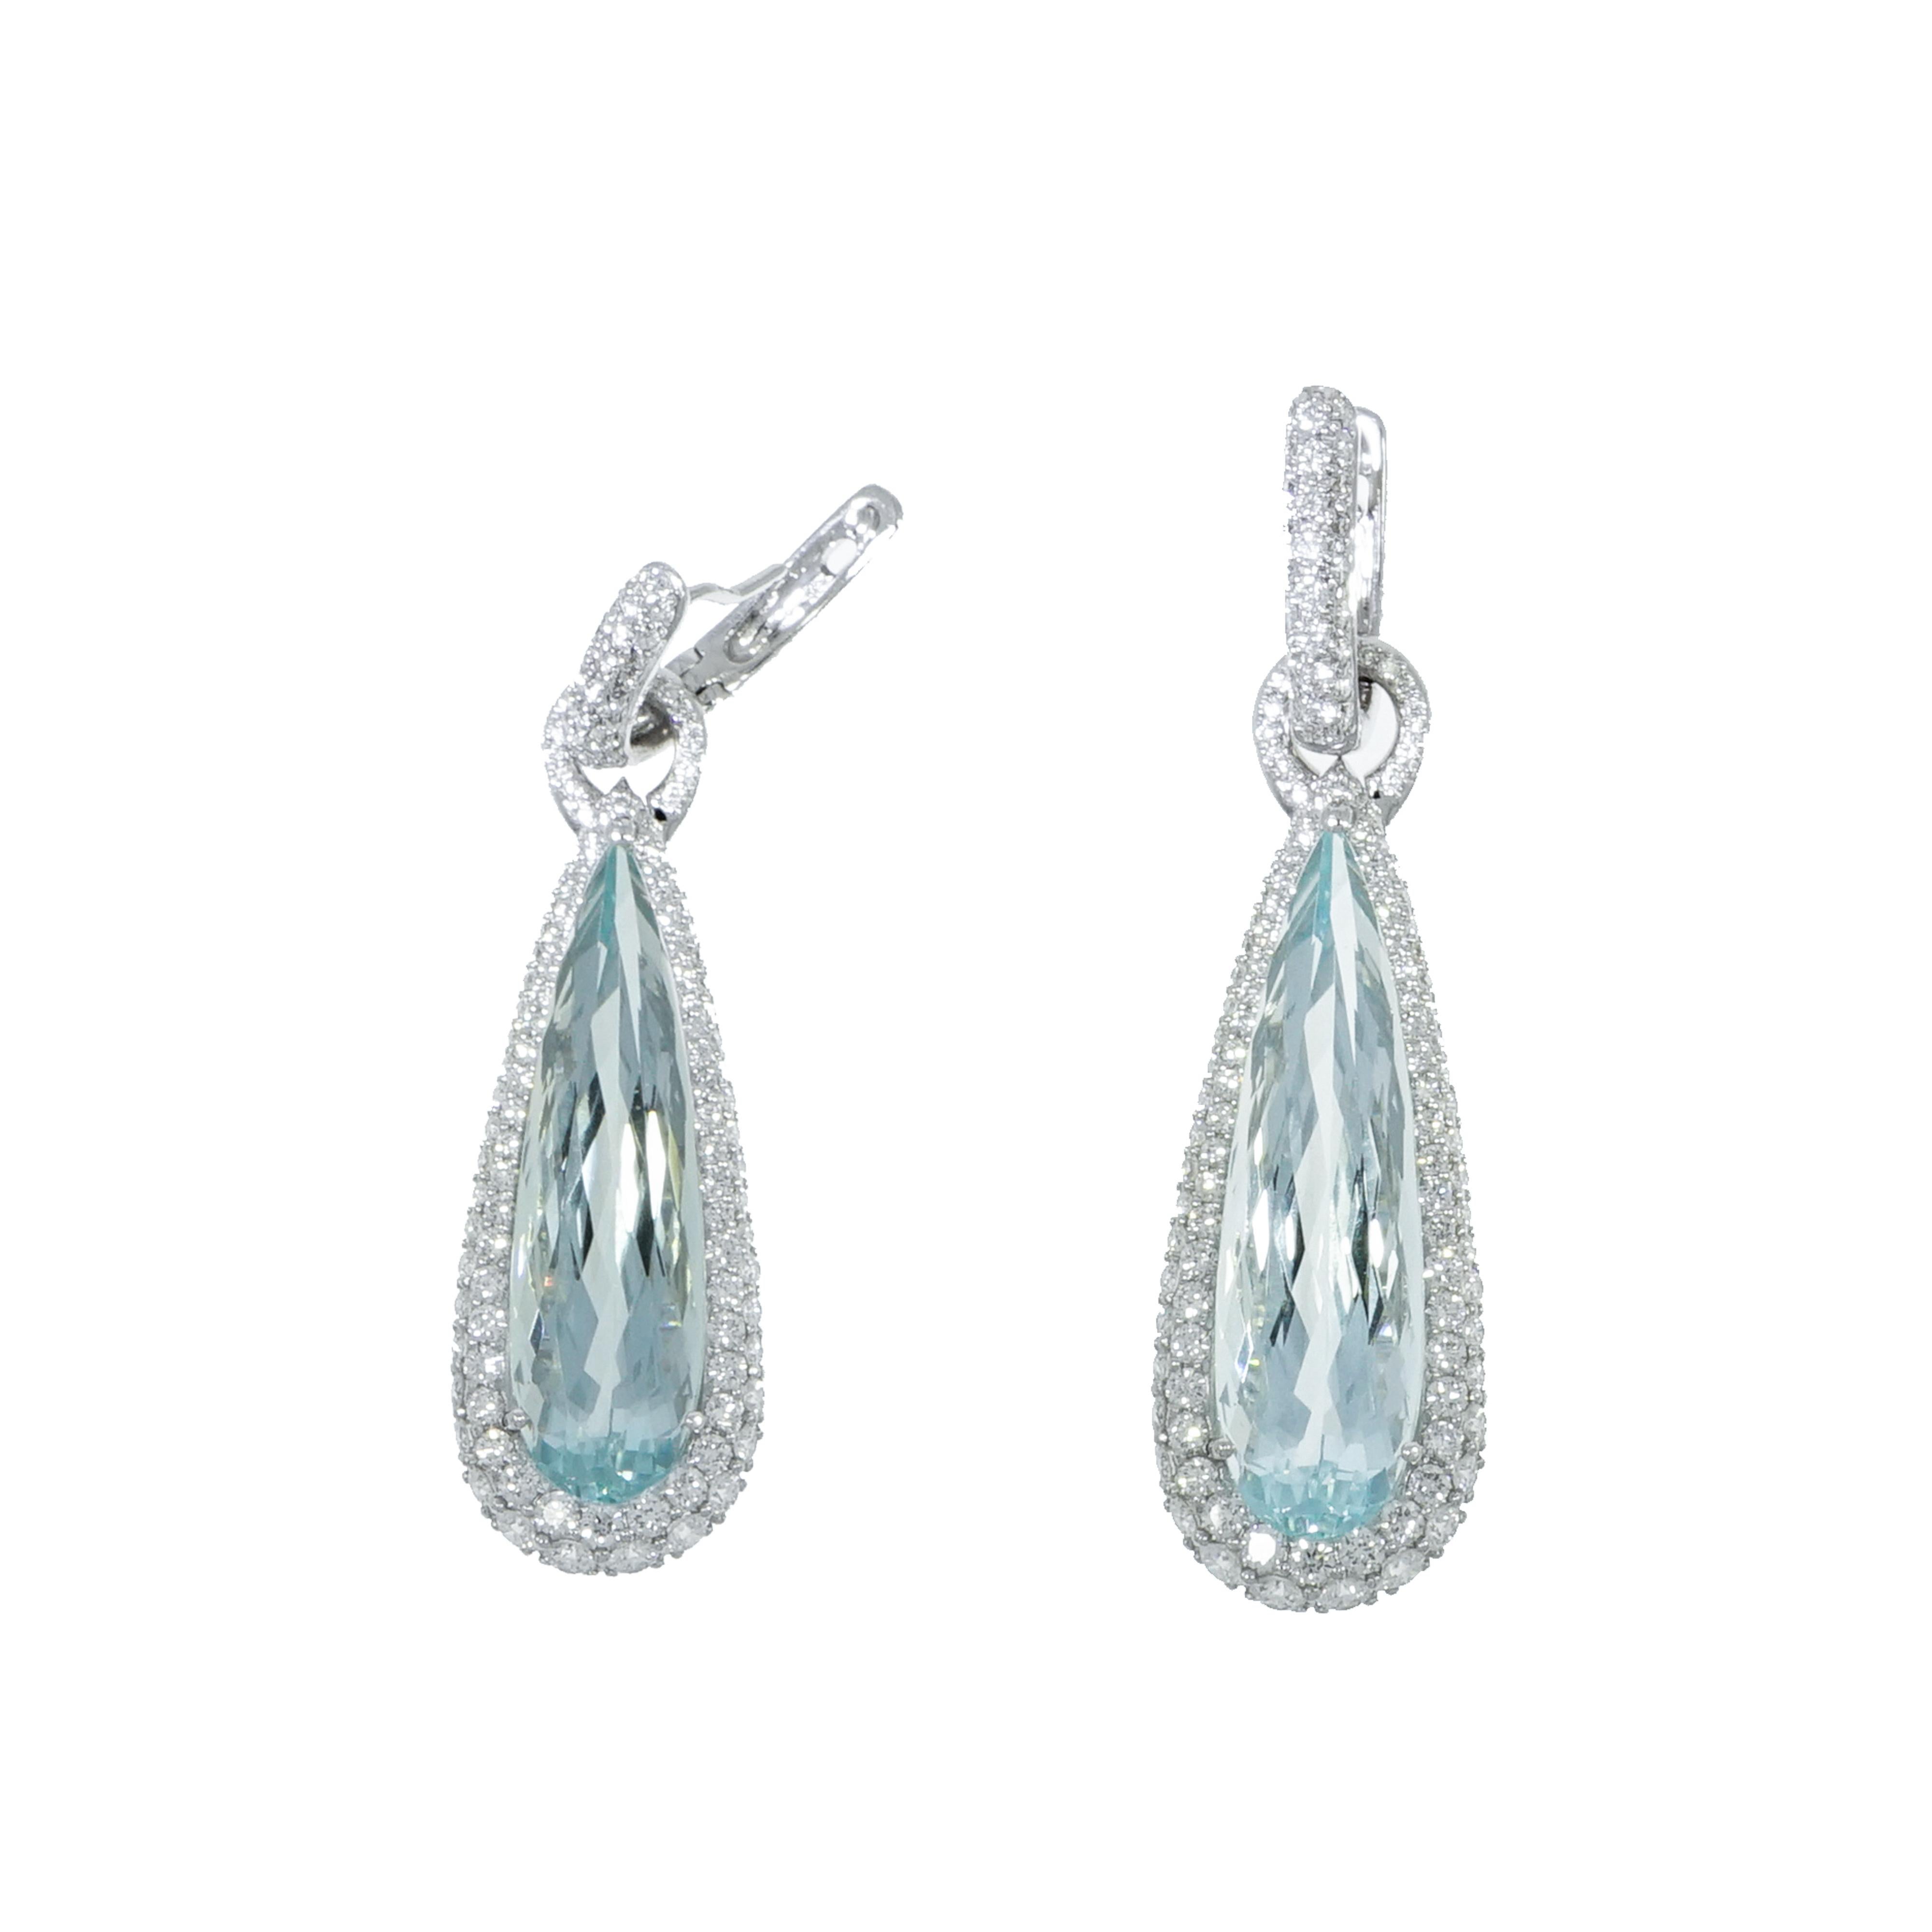 Classic, elegant, refined and sparkly... Designed with an intuitive feel for women who's seeking for wearable piece of art.
This Aquamarine and Diamond Drop earrings appeals to the one of discerning taste and style who demand only the finest quality